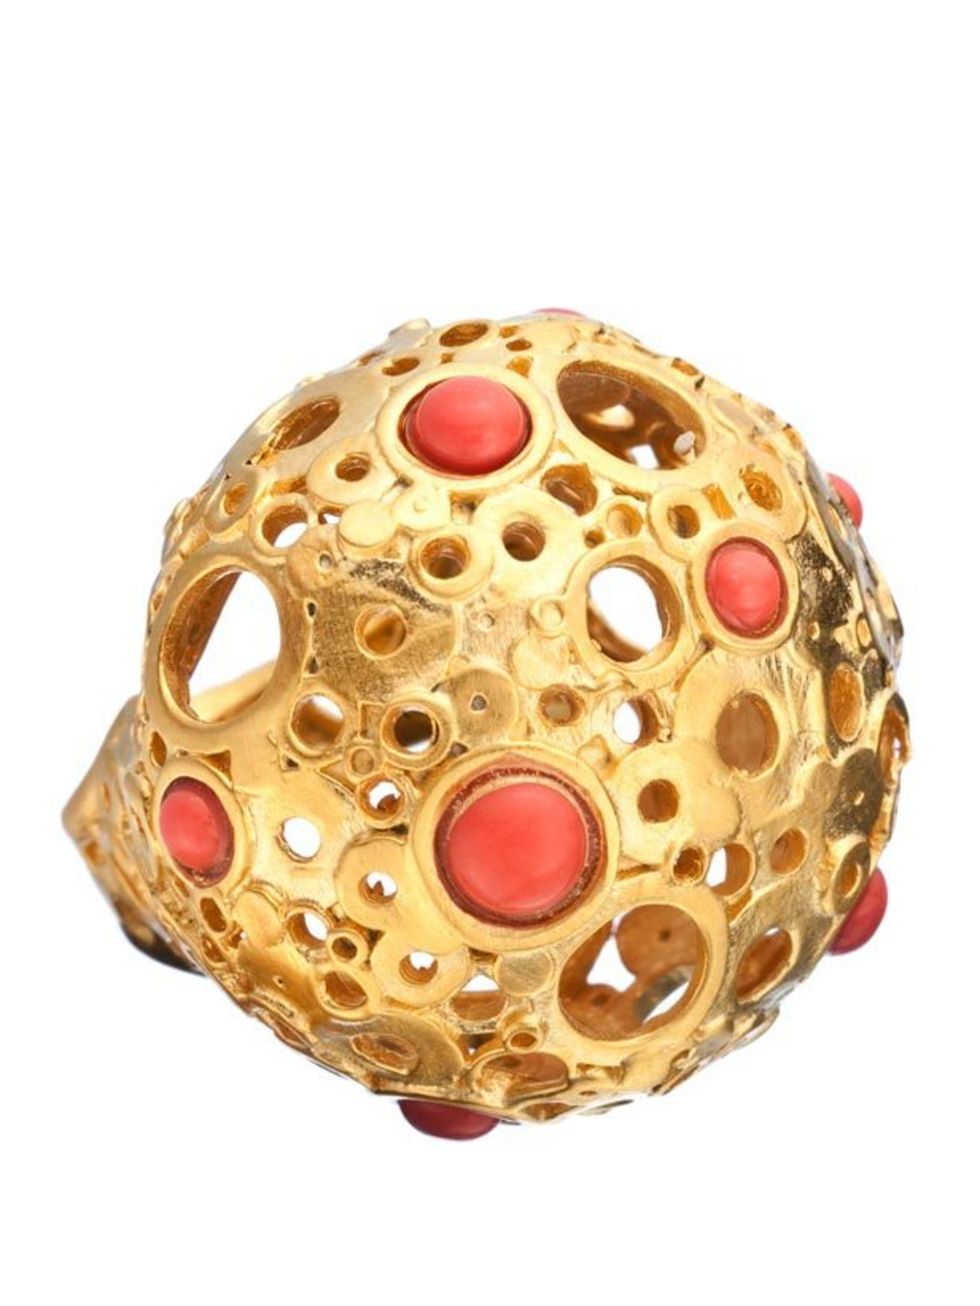 <p>Large gold and coral oval ring, £105, by <a href="http://www.alexisbittar.com/product.php?productid=21425&amp;cat=21&amp;page=1&amp;defvarid=13701">Alexis Bittar</a></p>